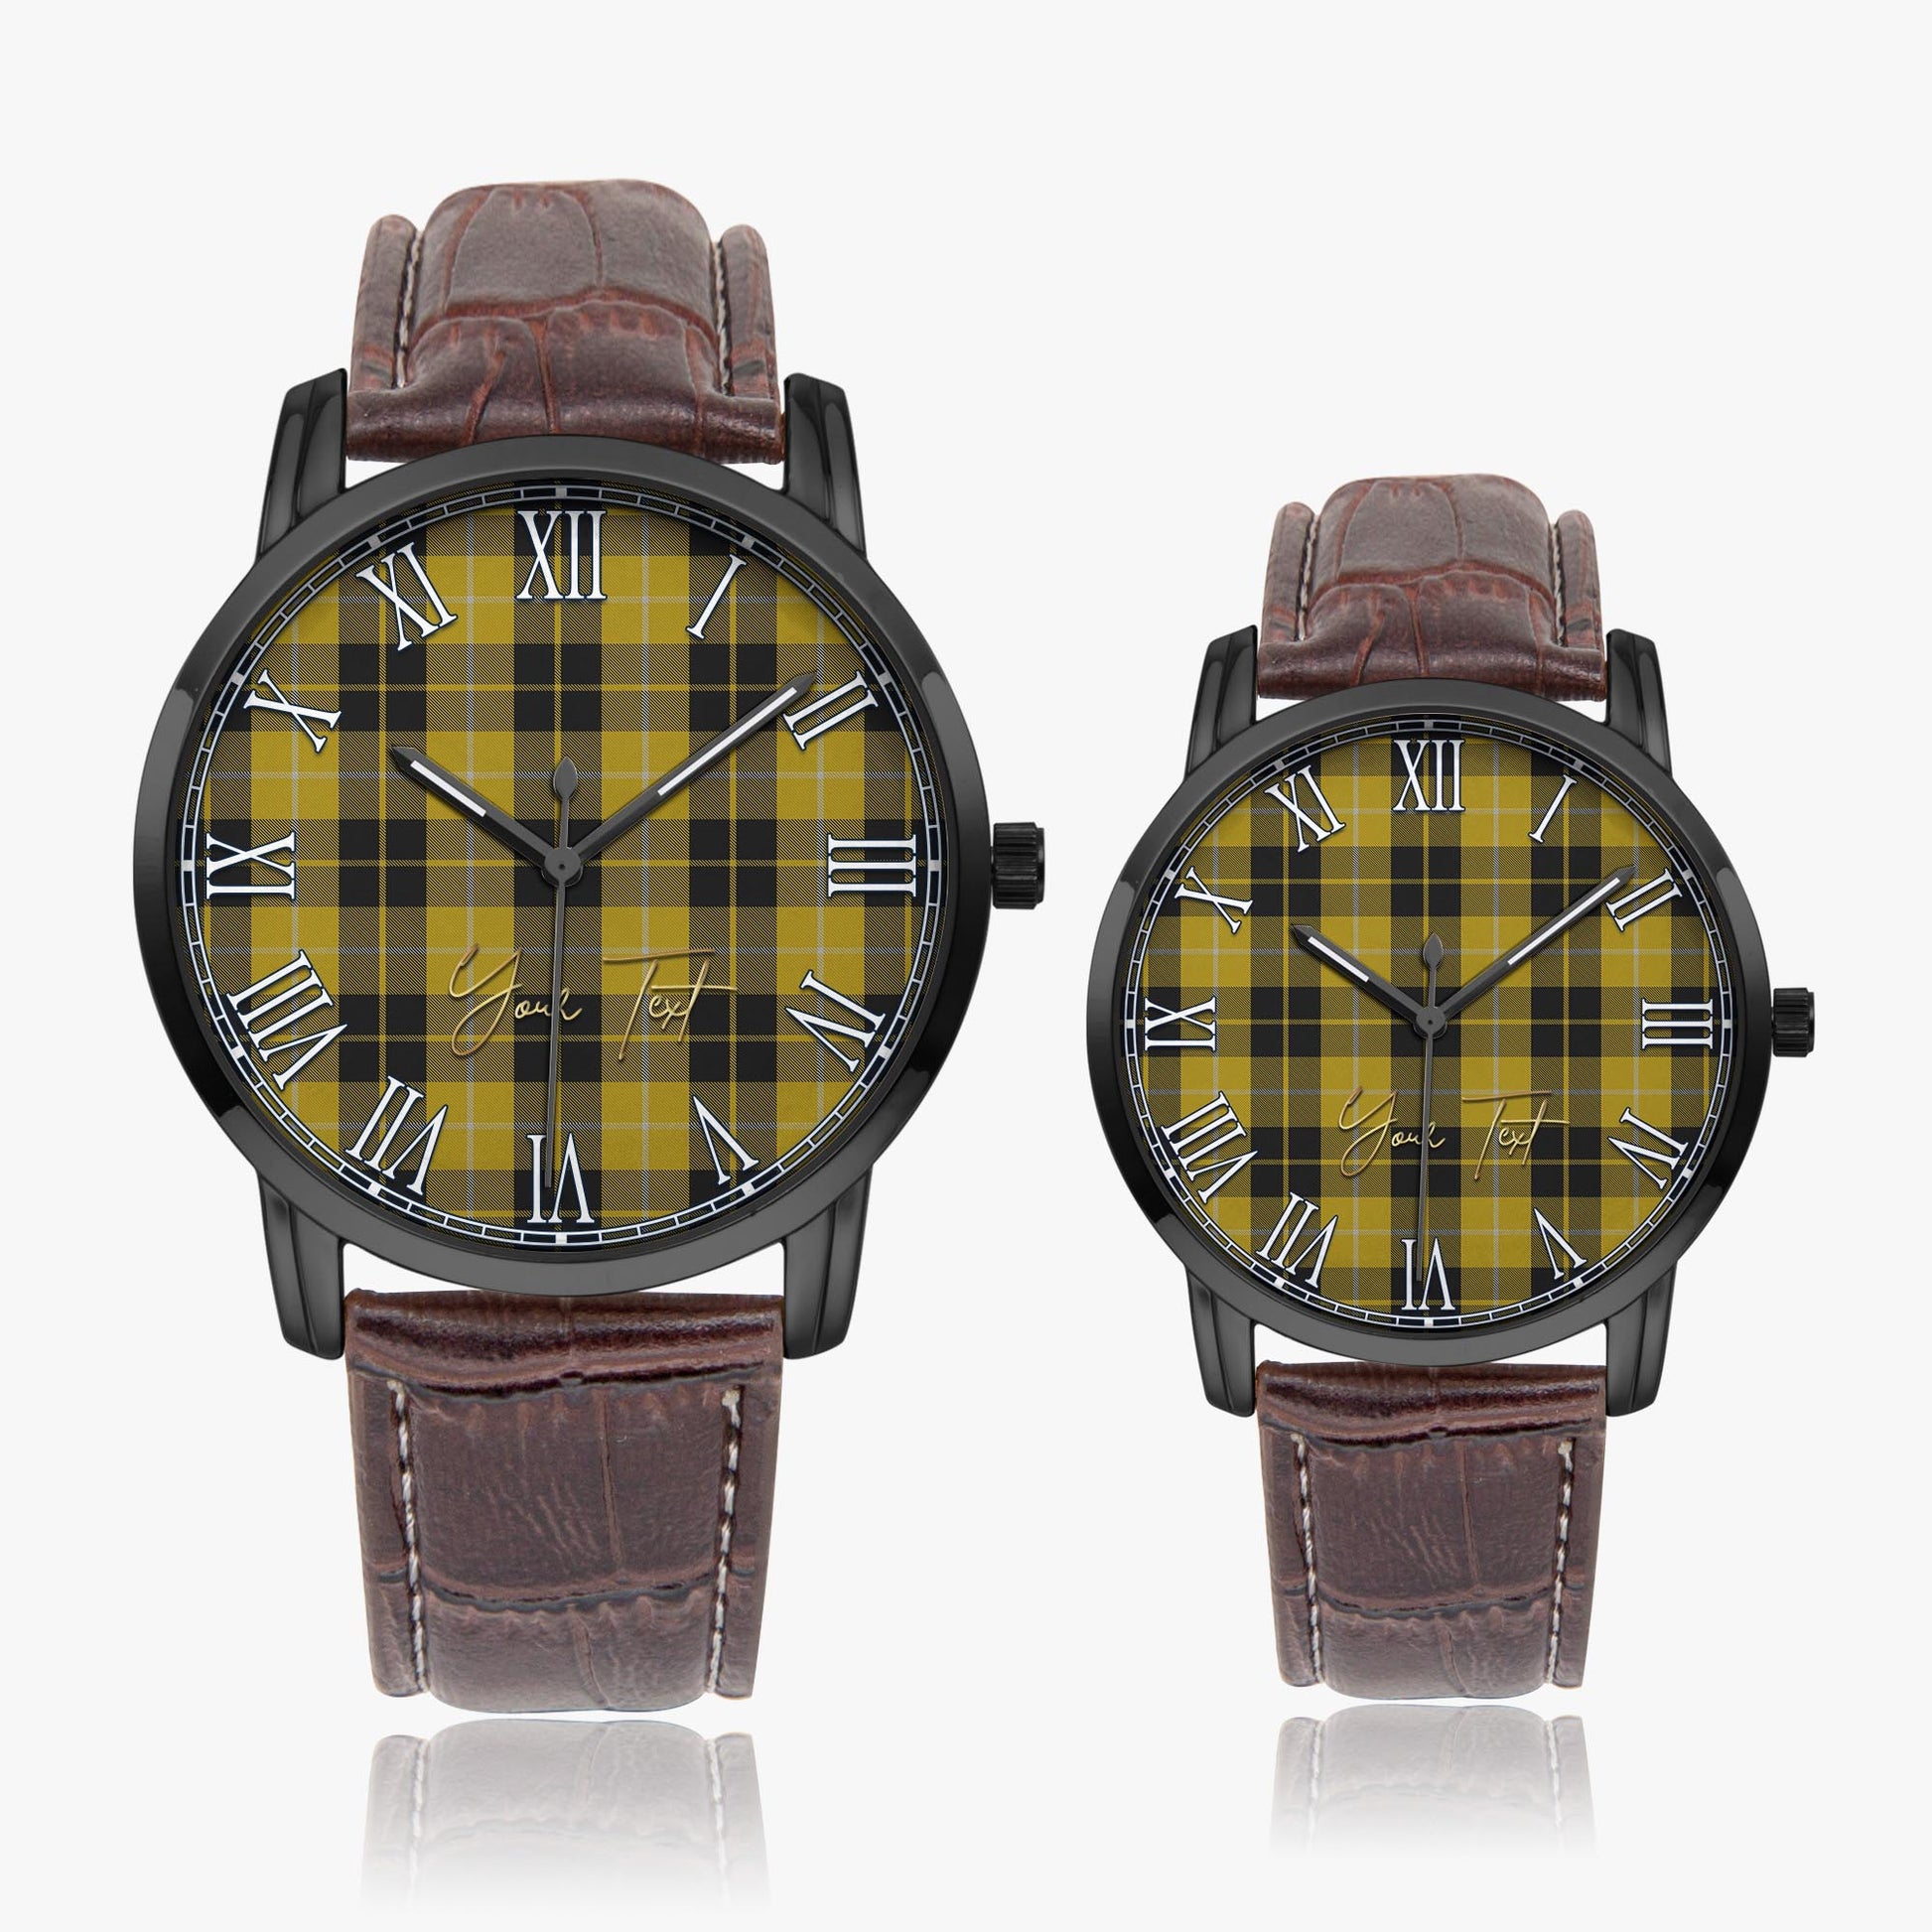 Barclay Dress Tartan Personalized Your Text Leather Trap Quartz Watch Wide Type Black Case With Brown Leather Strap - Tartanvibesclothing